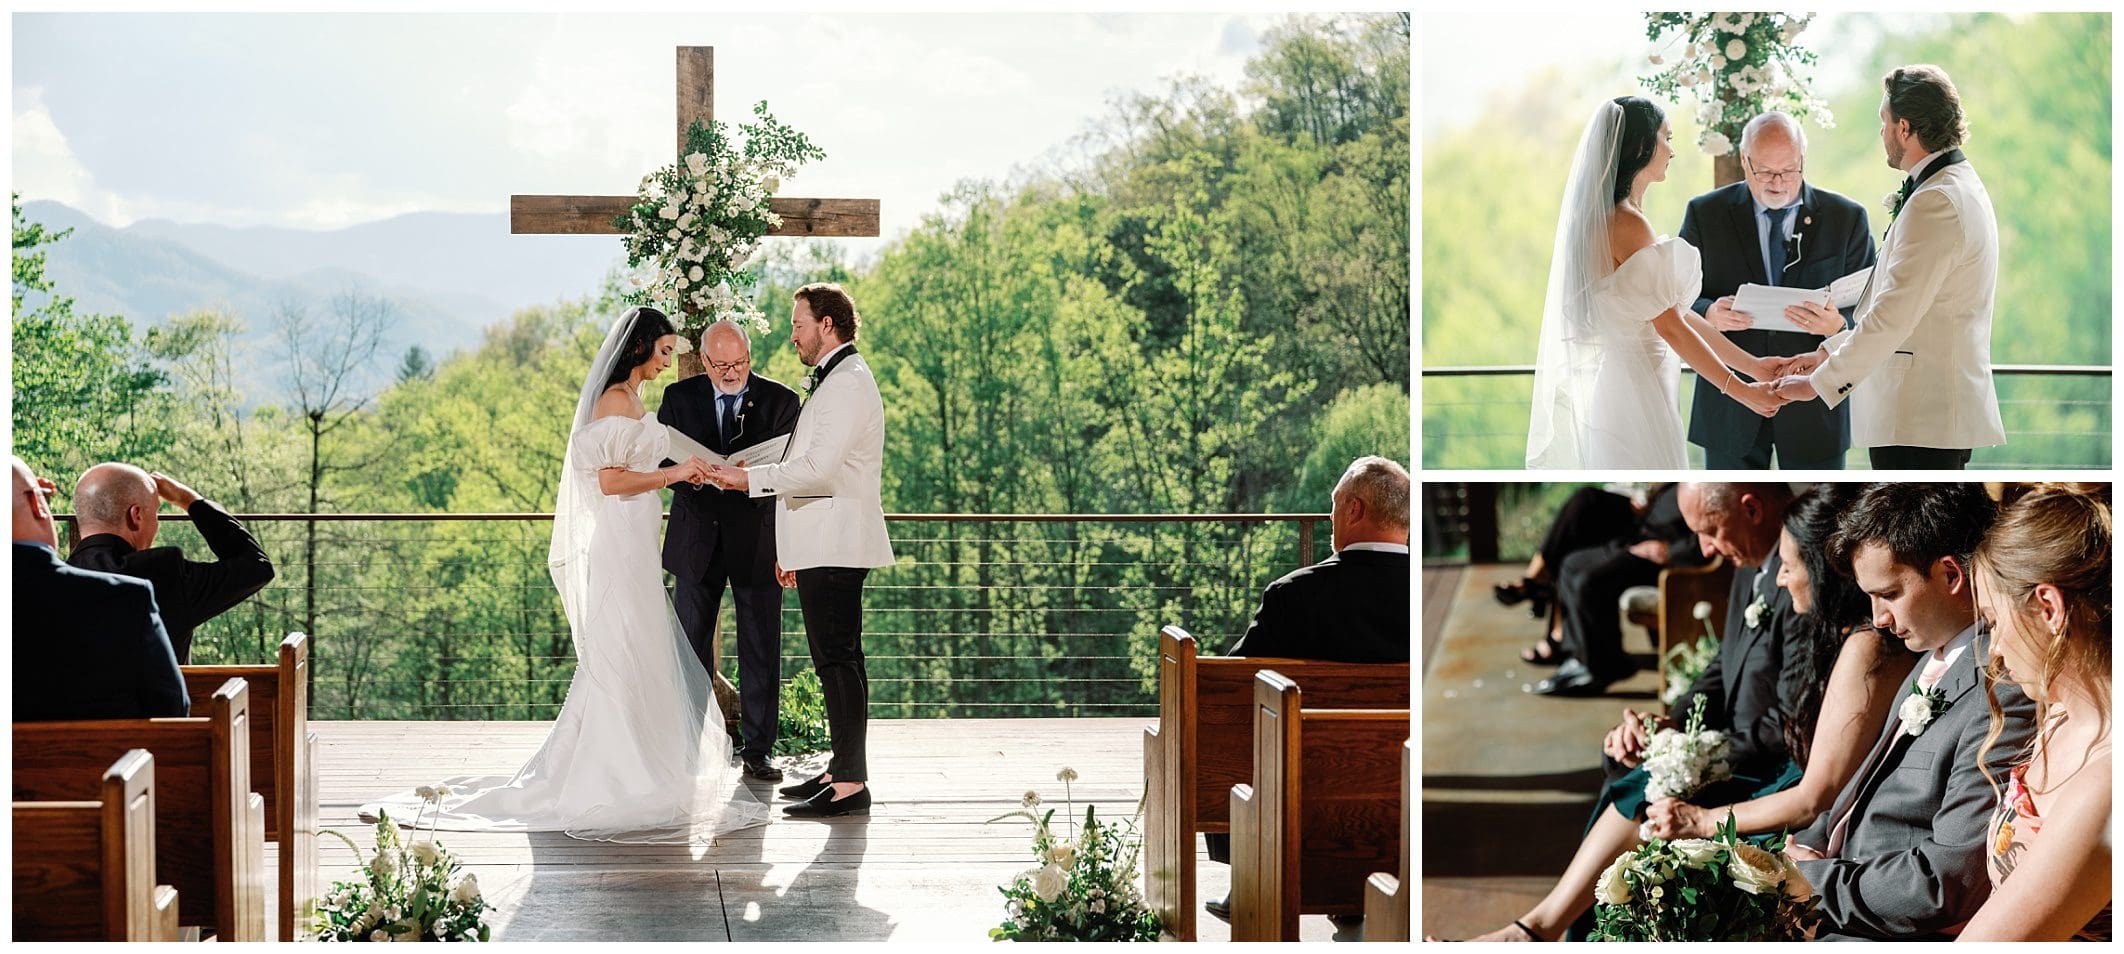 A wedding ceremony taking place on an outdoor platform, surrounded by guests and scenic mountain views, featuring two images of the couple exchanging vows and rings.